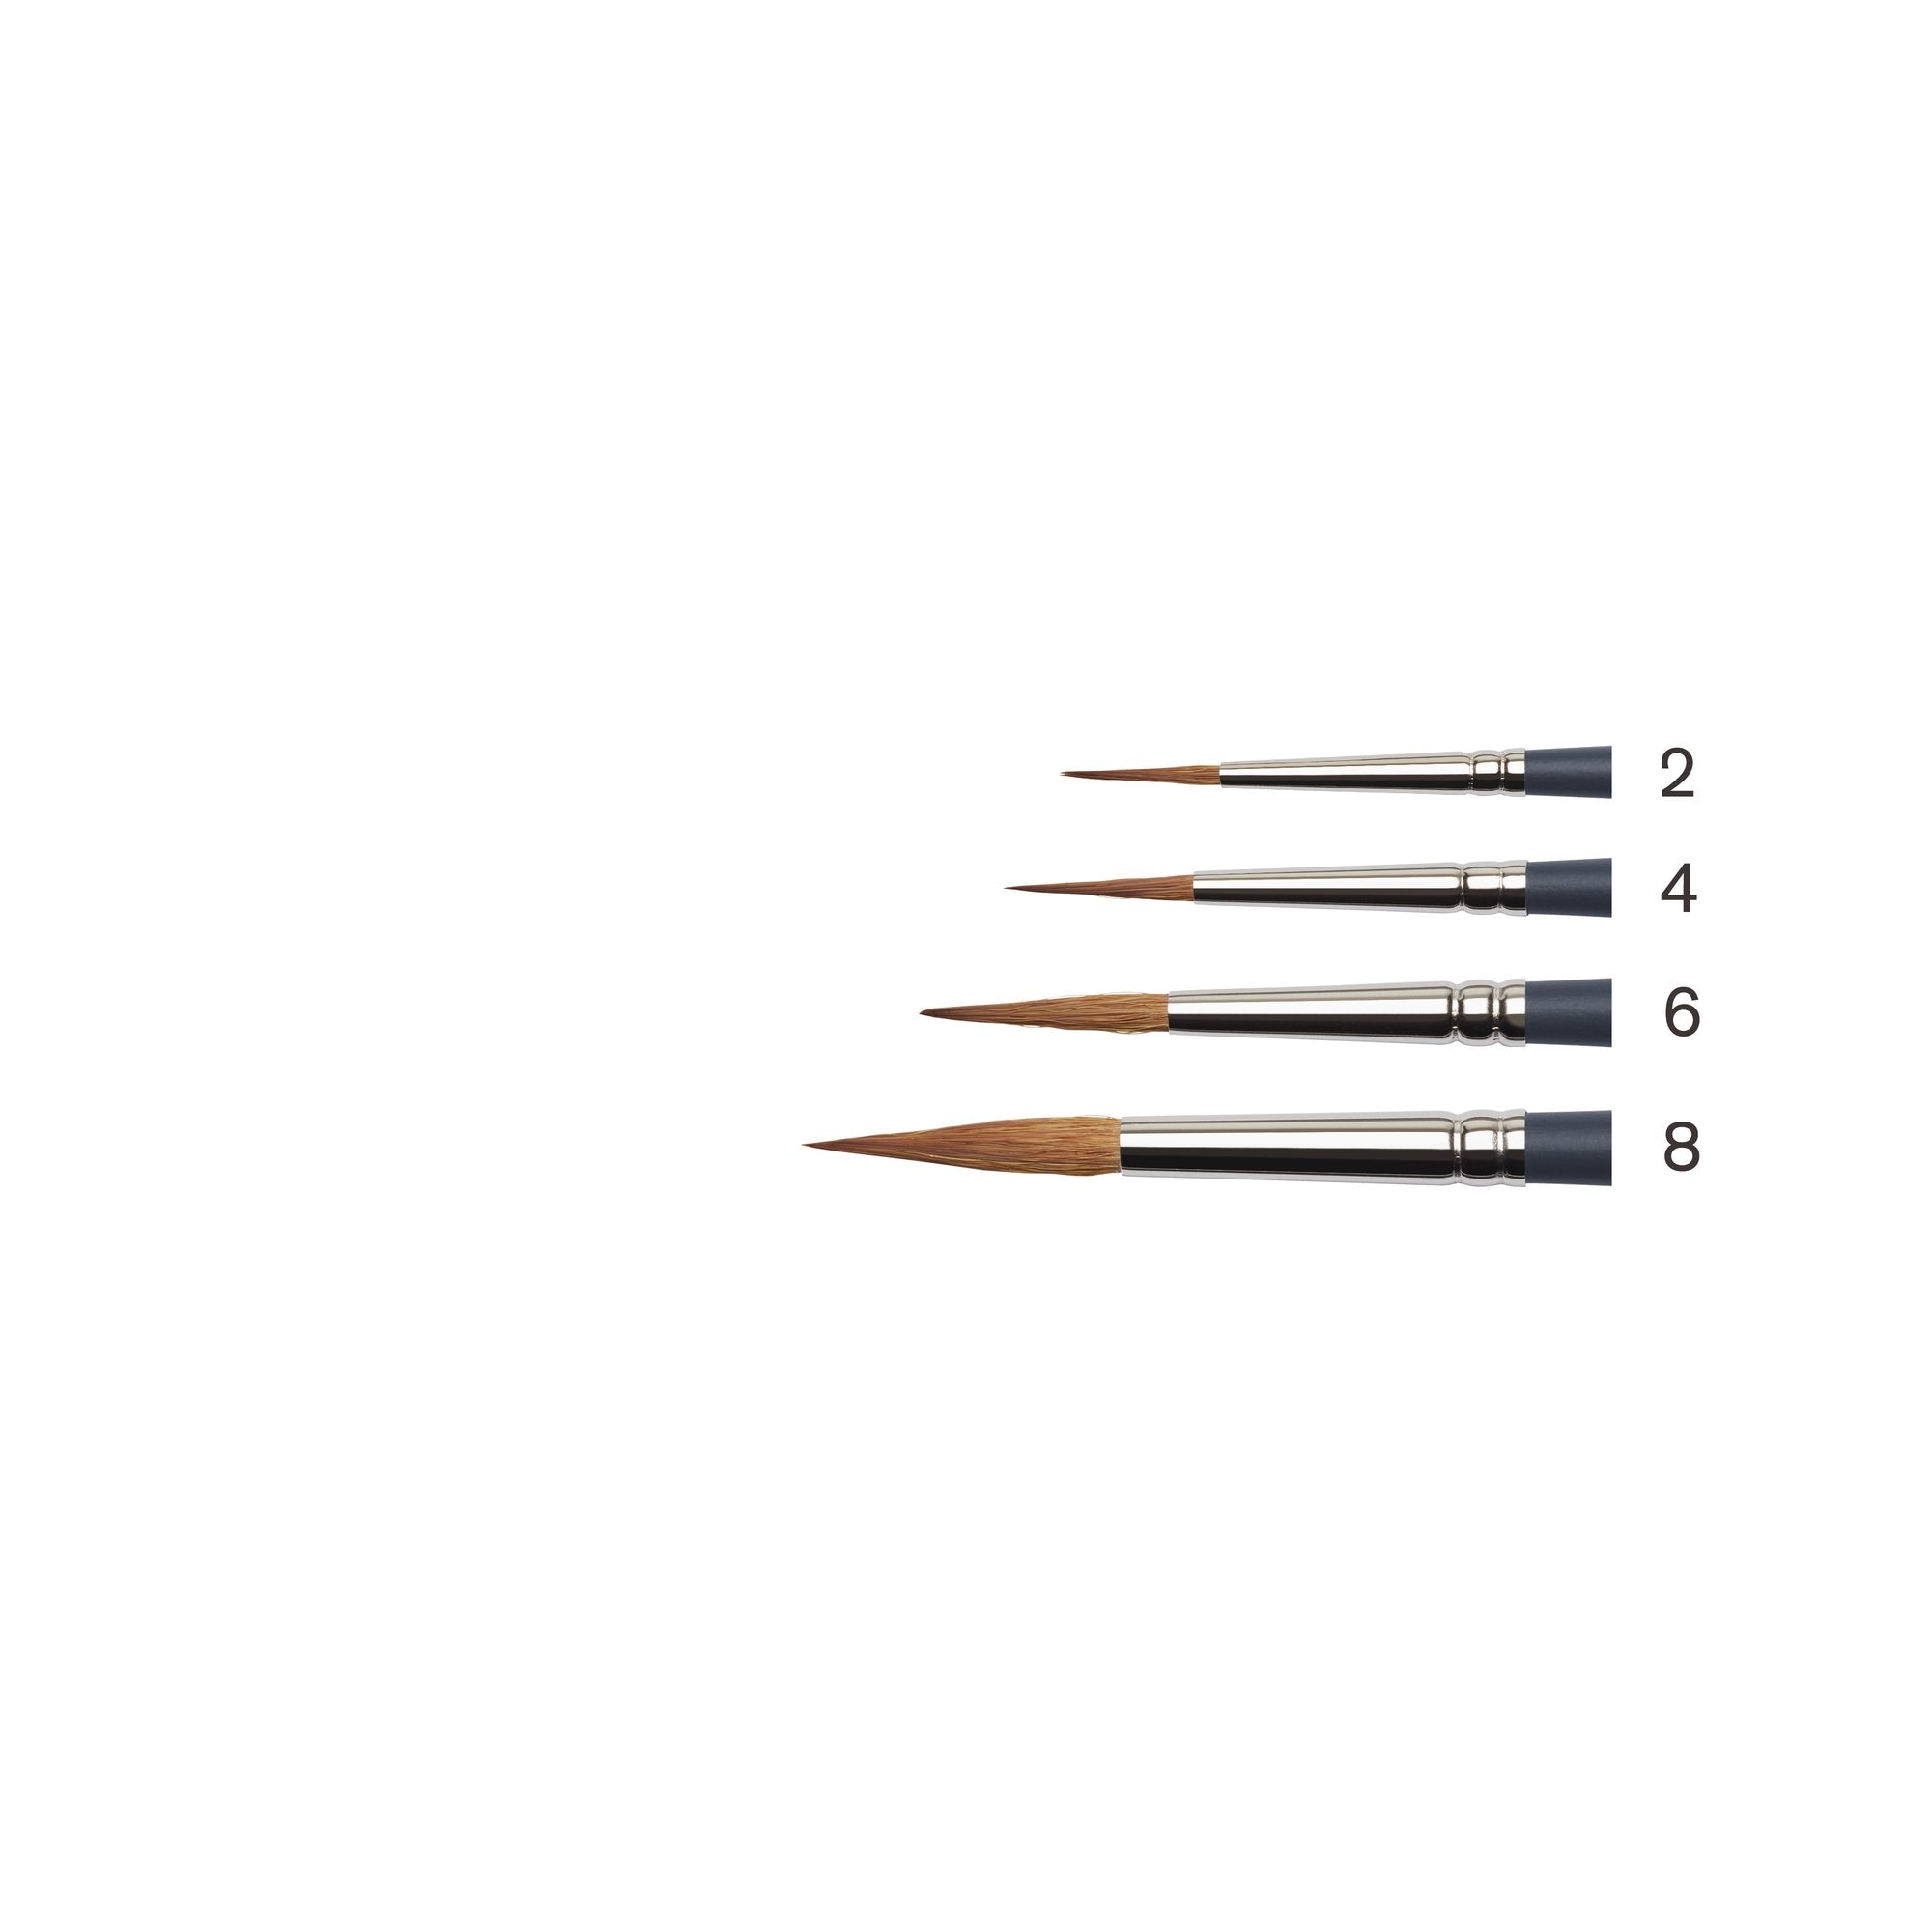 Winsor & Newton Professional Watercolour Synthetic Sable Brush Pointed Round 6